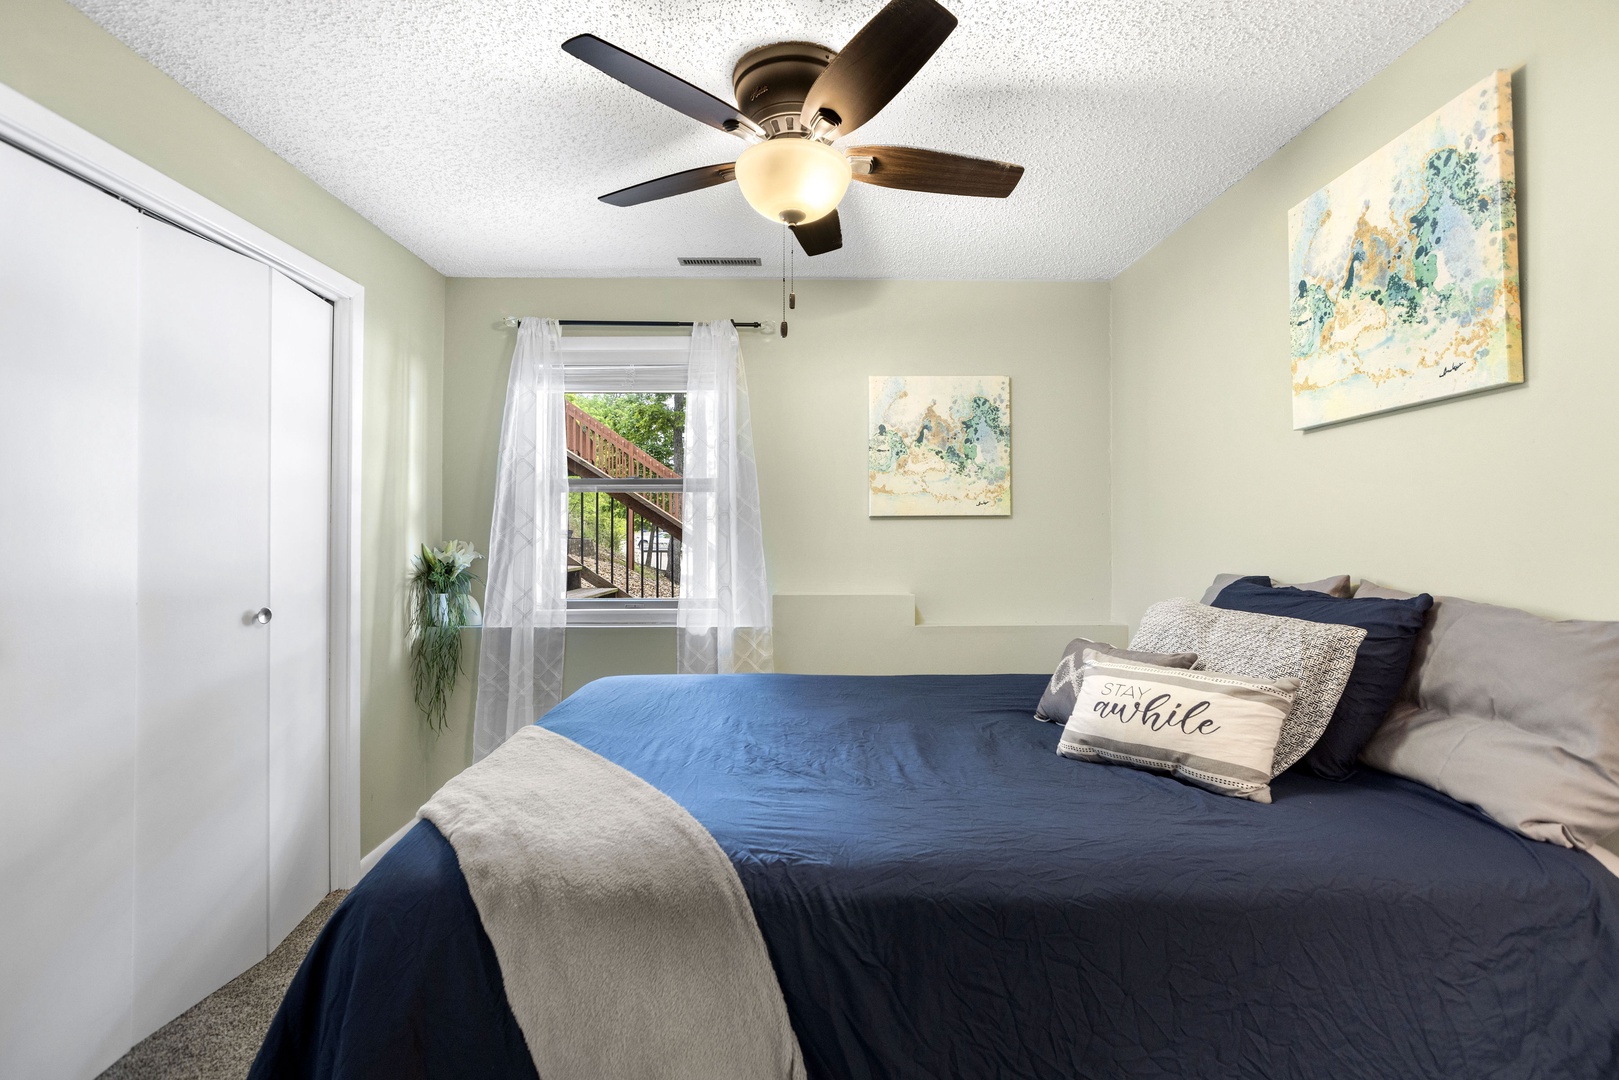 Relax in the second bedroom, including a queen bed & closet space